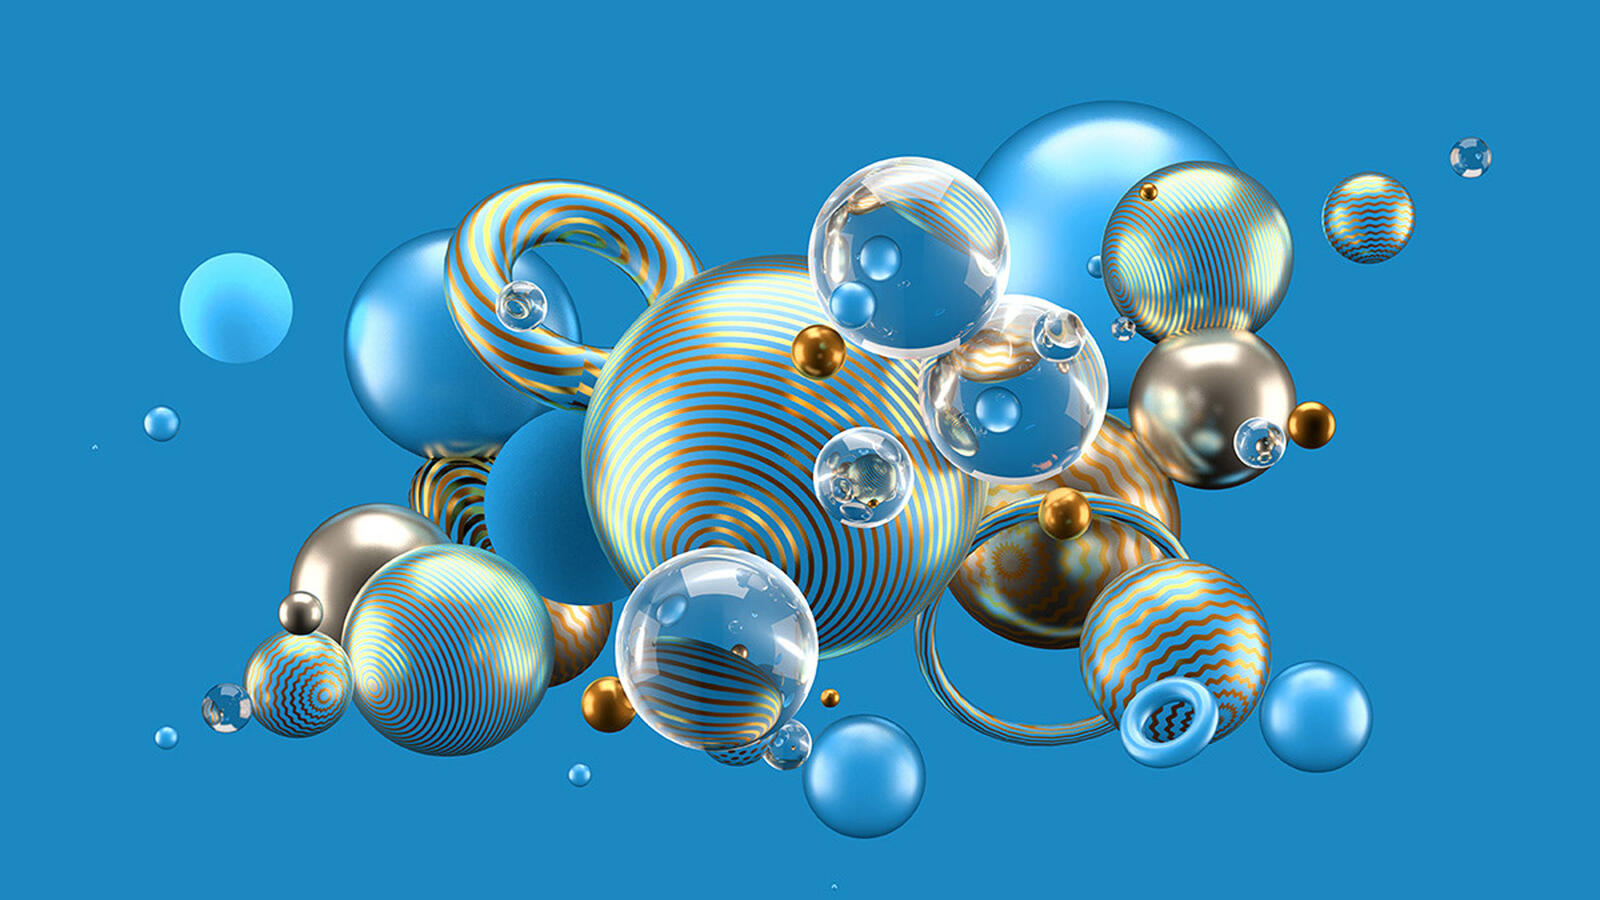 Wallpapers wallpaper bubbles circles glassry sphere on the desktop